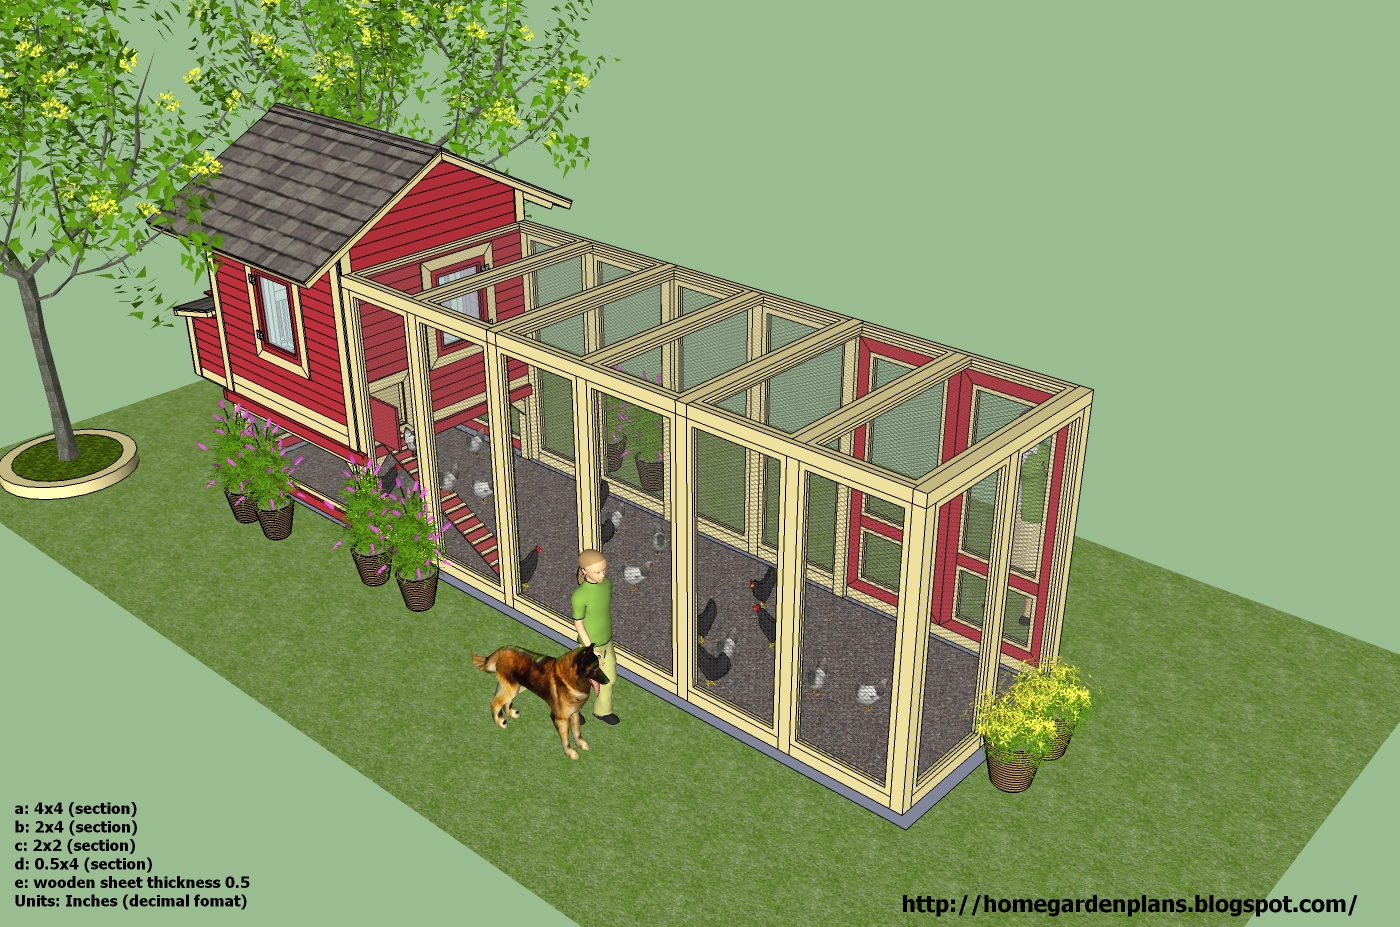 Diw You: Access Chicken coop plan for 20 chickens